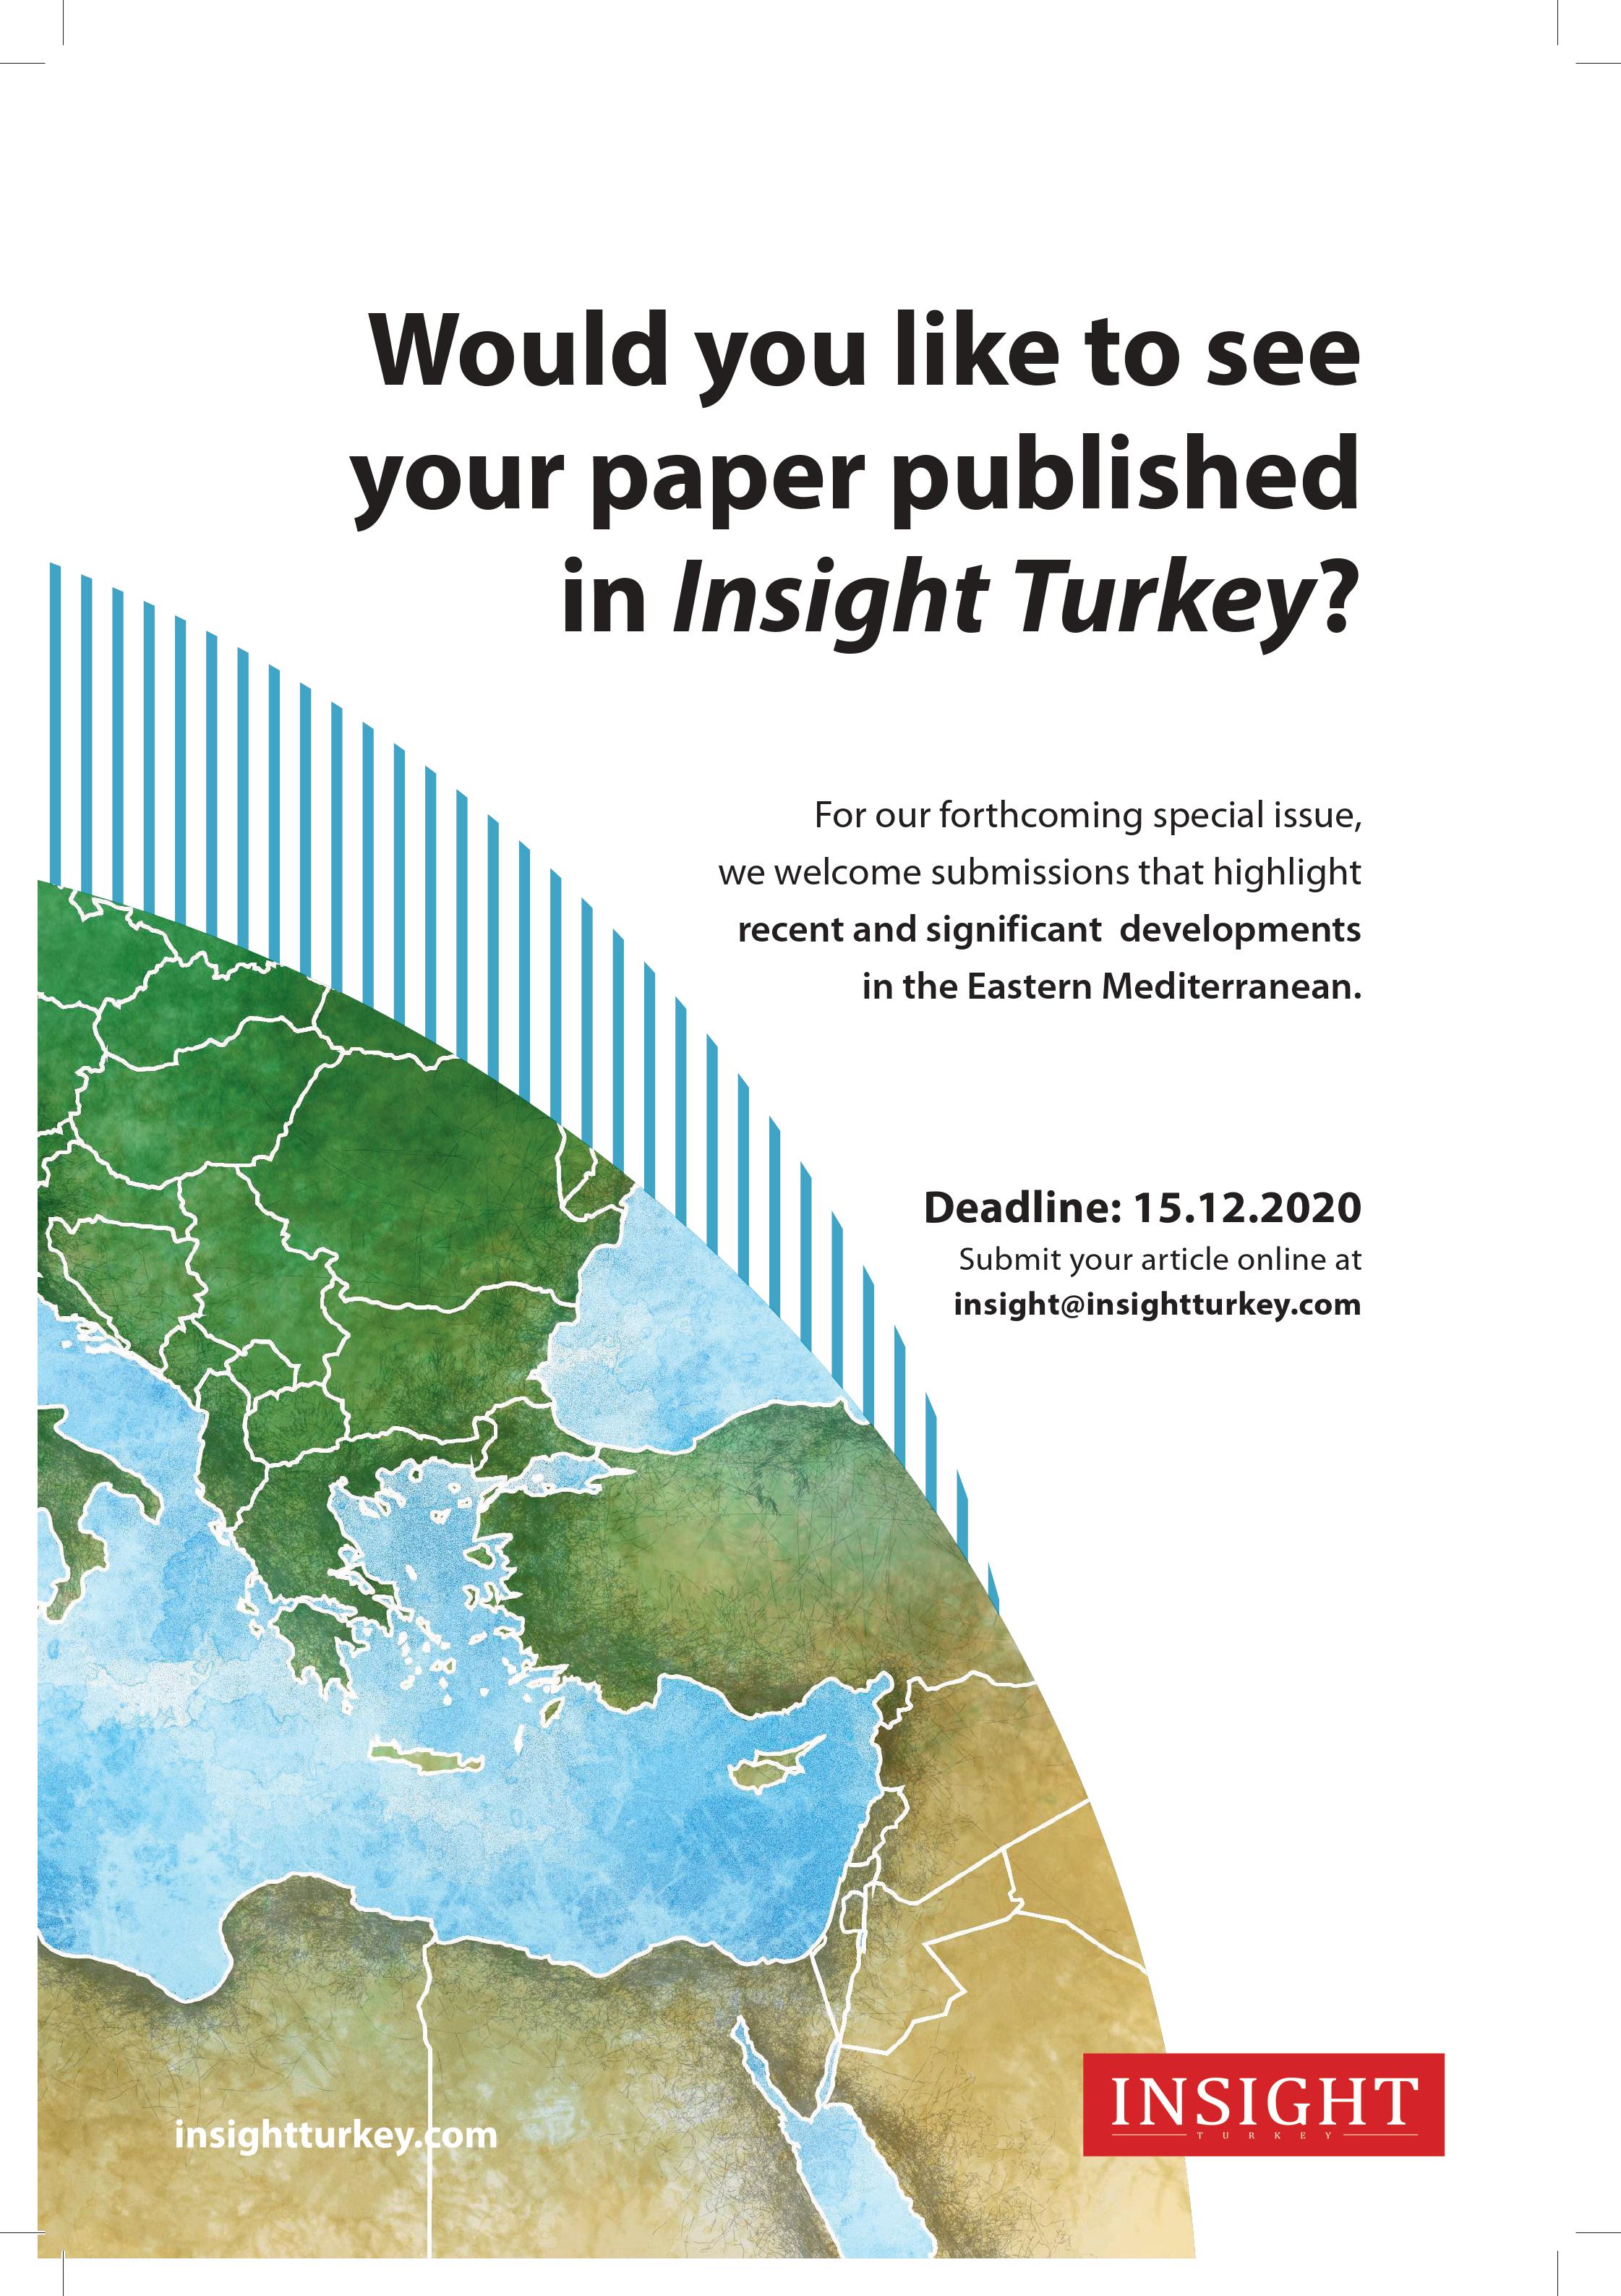 Call for Papers Eastern Mediterranean